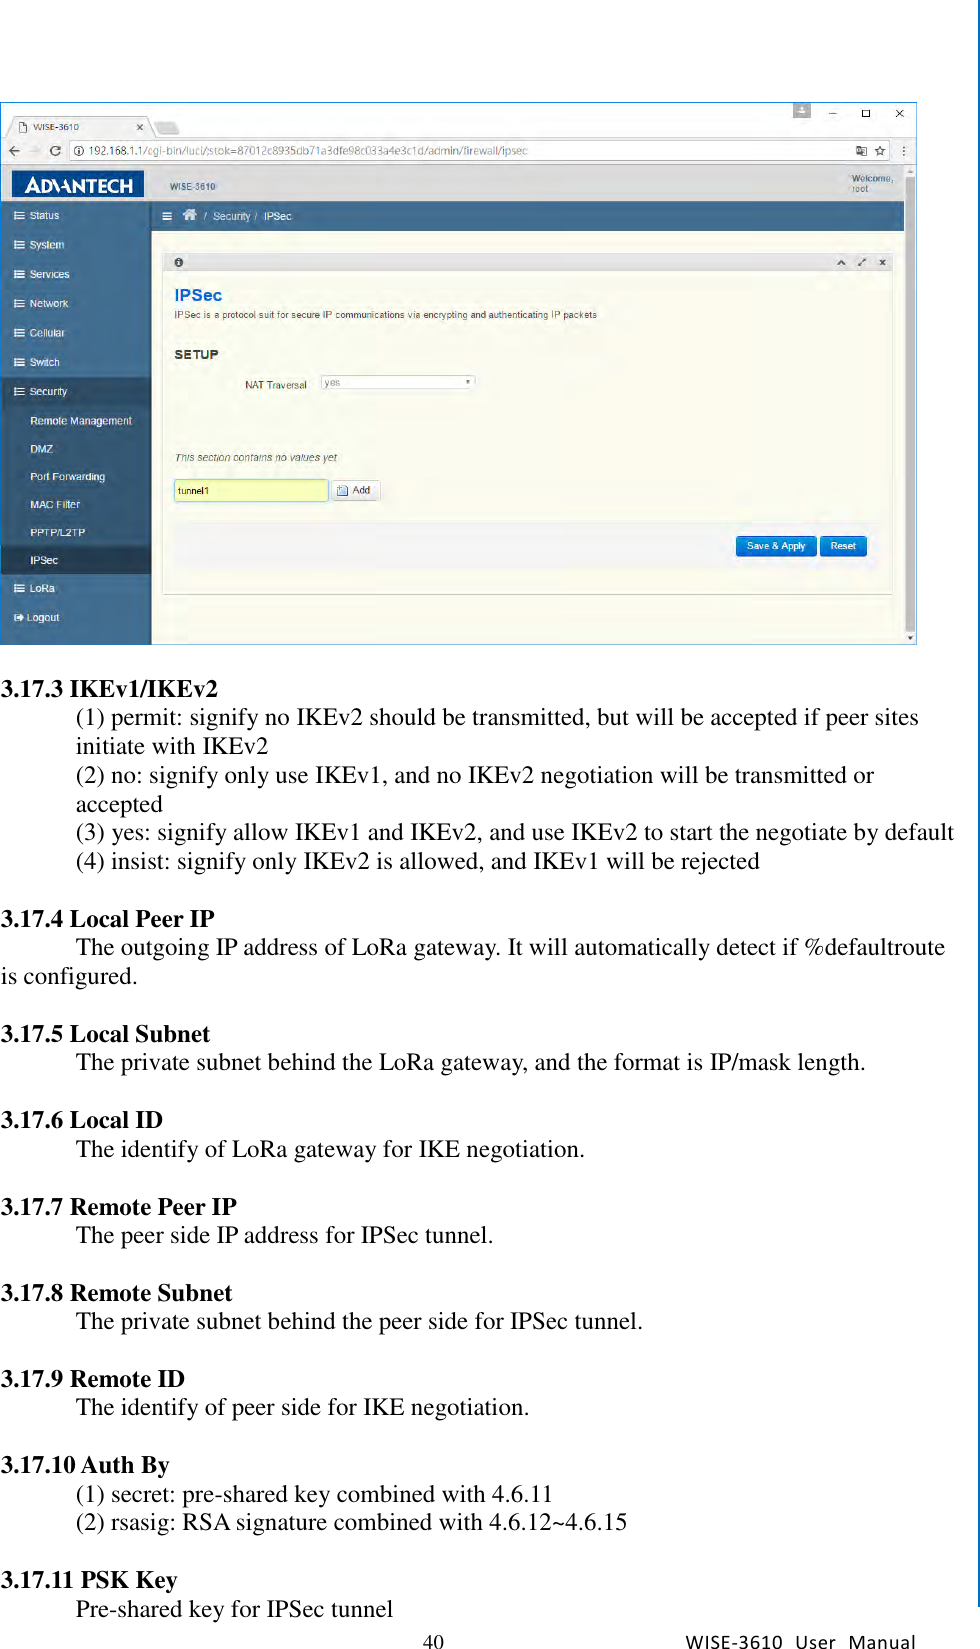   40 WISE-3610  User  Manual  Chapter5    Advantech Services   3.17.3 IKEv1/IKEv2 (1) permit: signify no IKEv2 should be transmitted, but will be accepted if peer sites initiate with IKEv2 (2) no: signify only use IKEv1, and no IKEv2 negotiation will be transmitted or accepted (3) yes: signify allow IKEv1 and IKEv2, and use IKEv2 to start the negotiate by default (4) insist: signify only IKEv2 is allowed, and IKEv1 will be rejected  3.17.4 Local Peer IP The outgoing IP address of LoRa gateway. It will automatically detect if %defaultroute is configured.    3.17.5 Local Subnet The private subnet behind the LoRa gateway, and the format is IP/mask length.    3.17.6 Local ID The identify of LoRa gateway for IKE negotiation.    3.17.7 Remote Peer IP The peer side IP address for IPSec tunnel.    3.17.8 Remote Subnet The private subnet behind the peer side for IPSec tunnel.    3.17.9 Remote ID The identify of peer side for IKE negotiation.    3.17.10 Auth By (1) secret: pre-shared key combined with 4.6.11 (2) rsasig: RSA signature combined with 4.6.12~4.6.15  3.17.11 PSK Key Pre-shared key for IPSec tunnel 